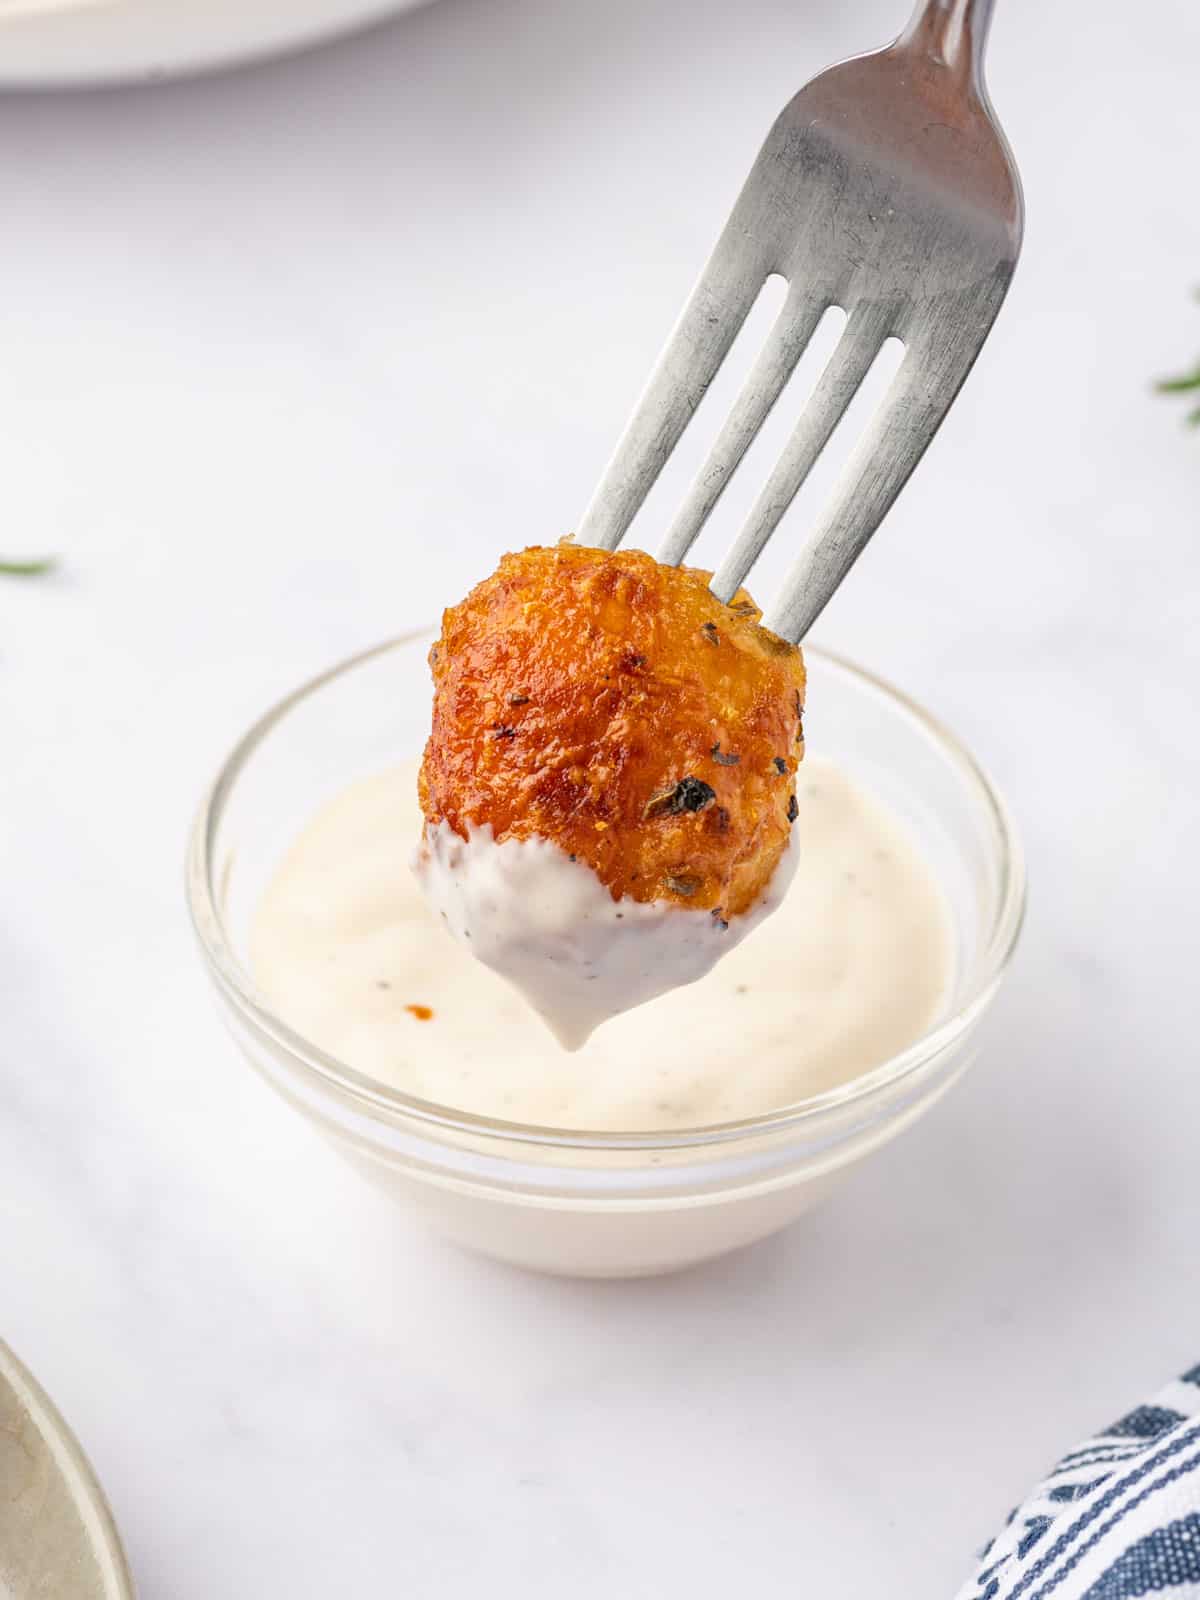 Baby Roasted potato is dipped in a creamy sauce.